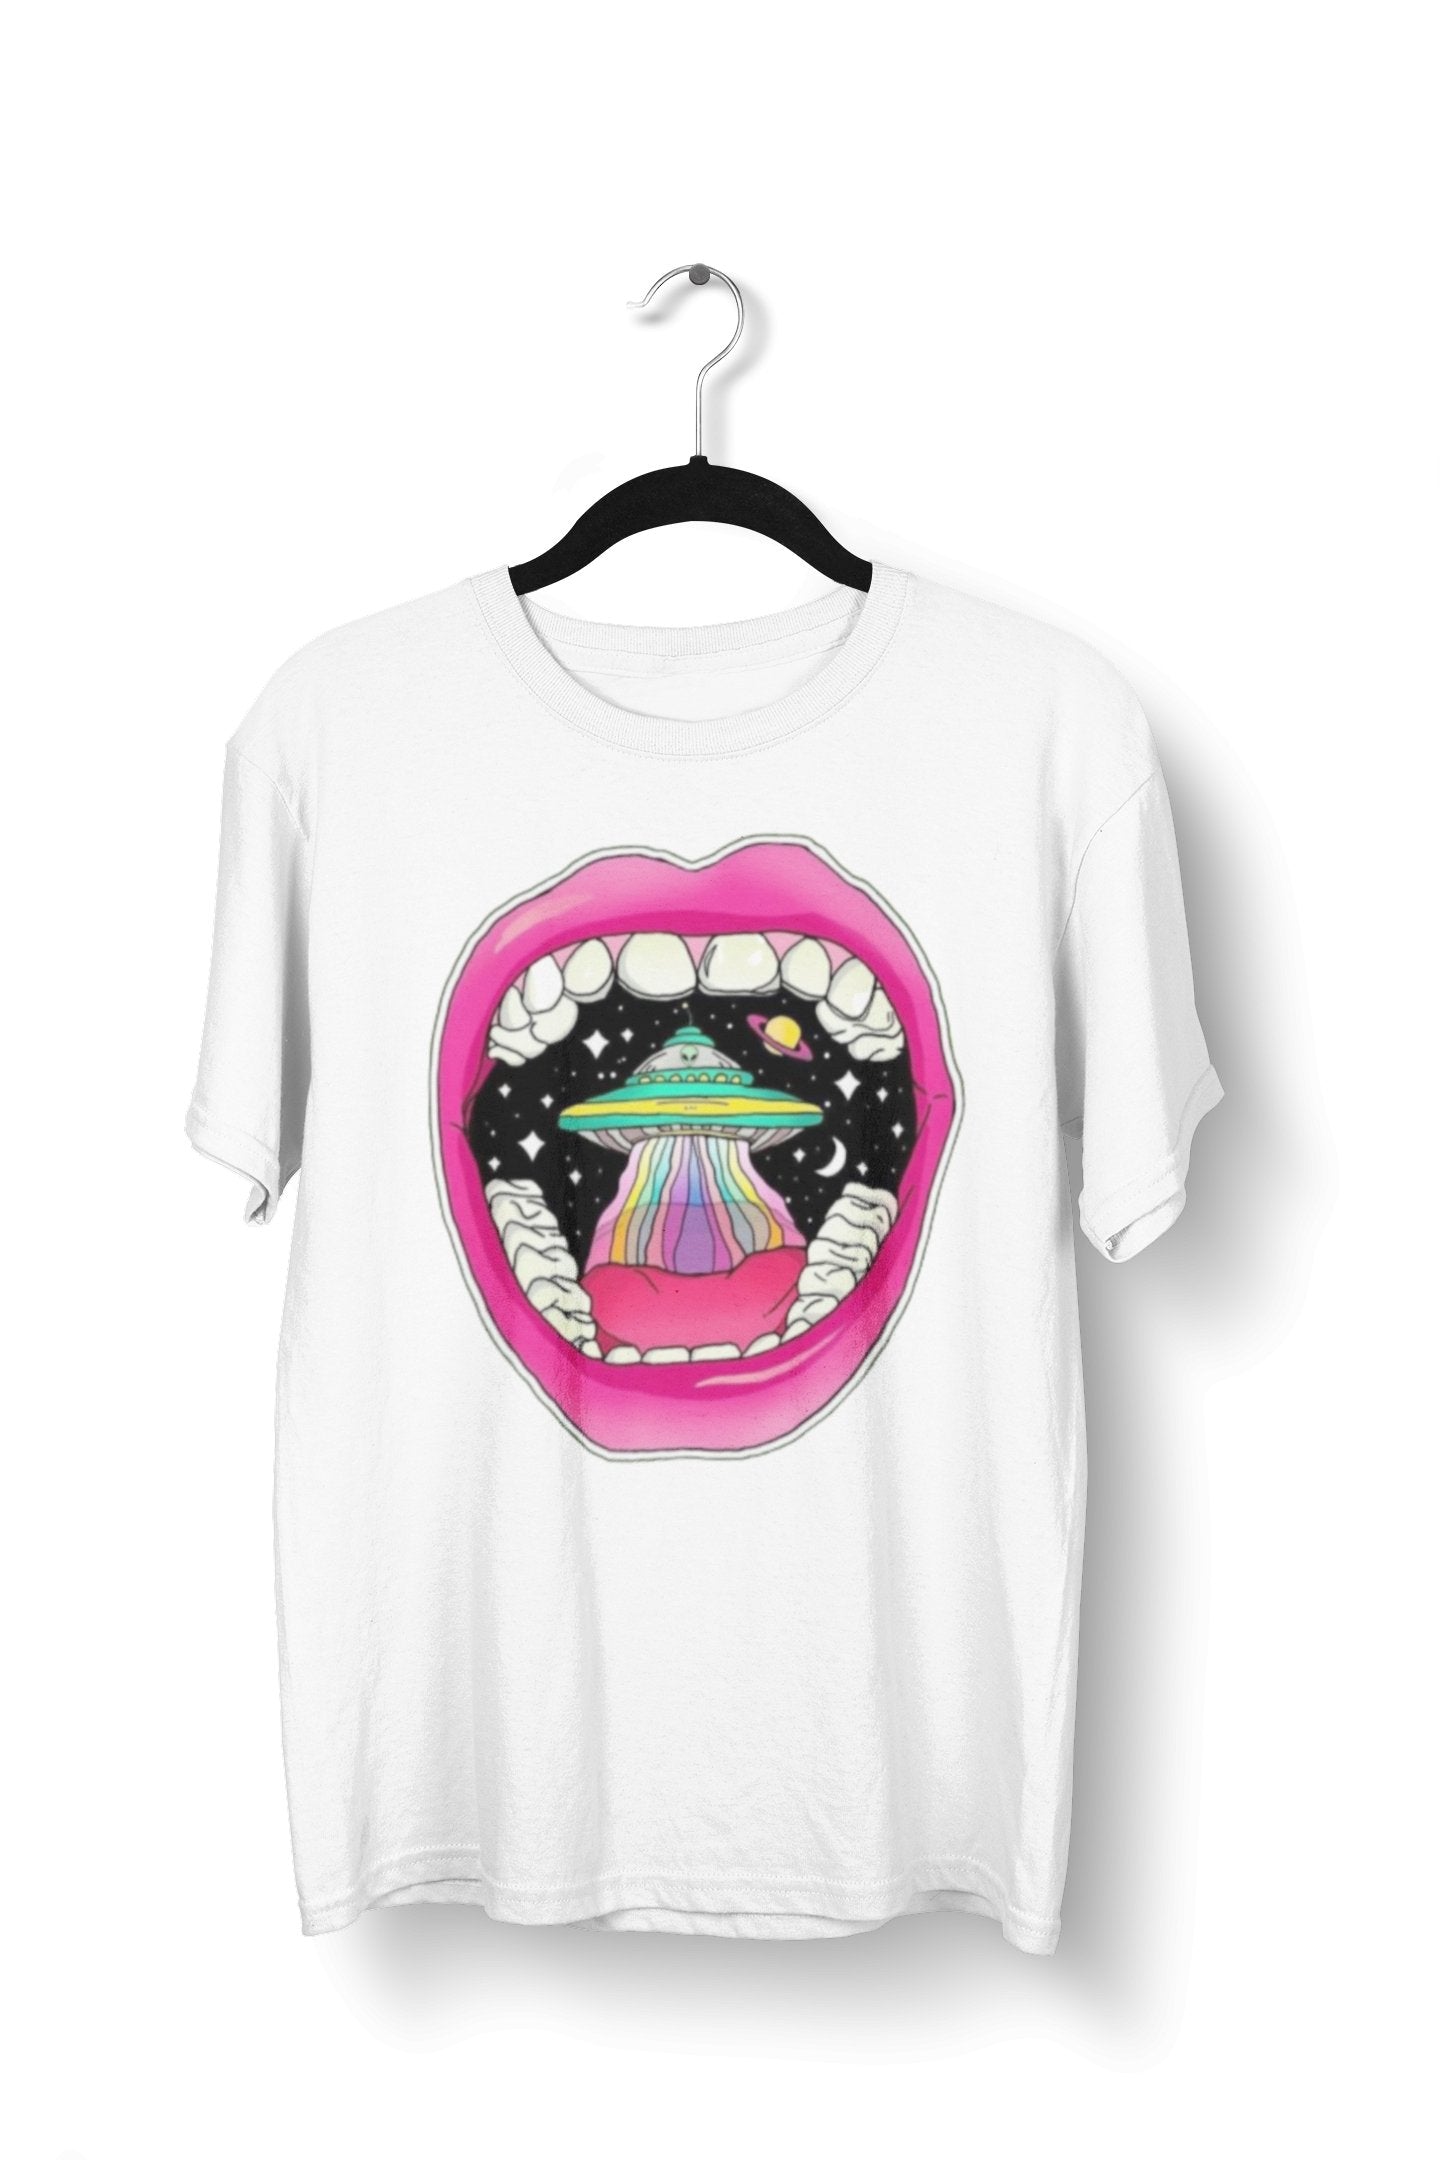 thelegalgang,Psychedelic Alien Graphic Art T-Shirt for Men,.